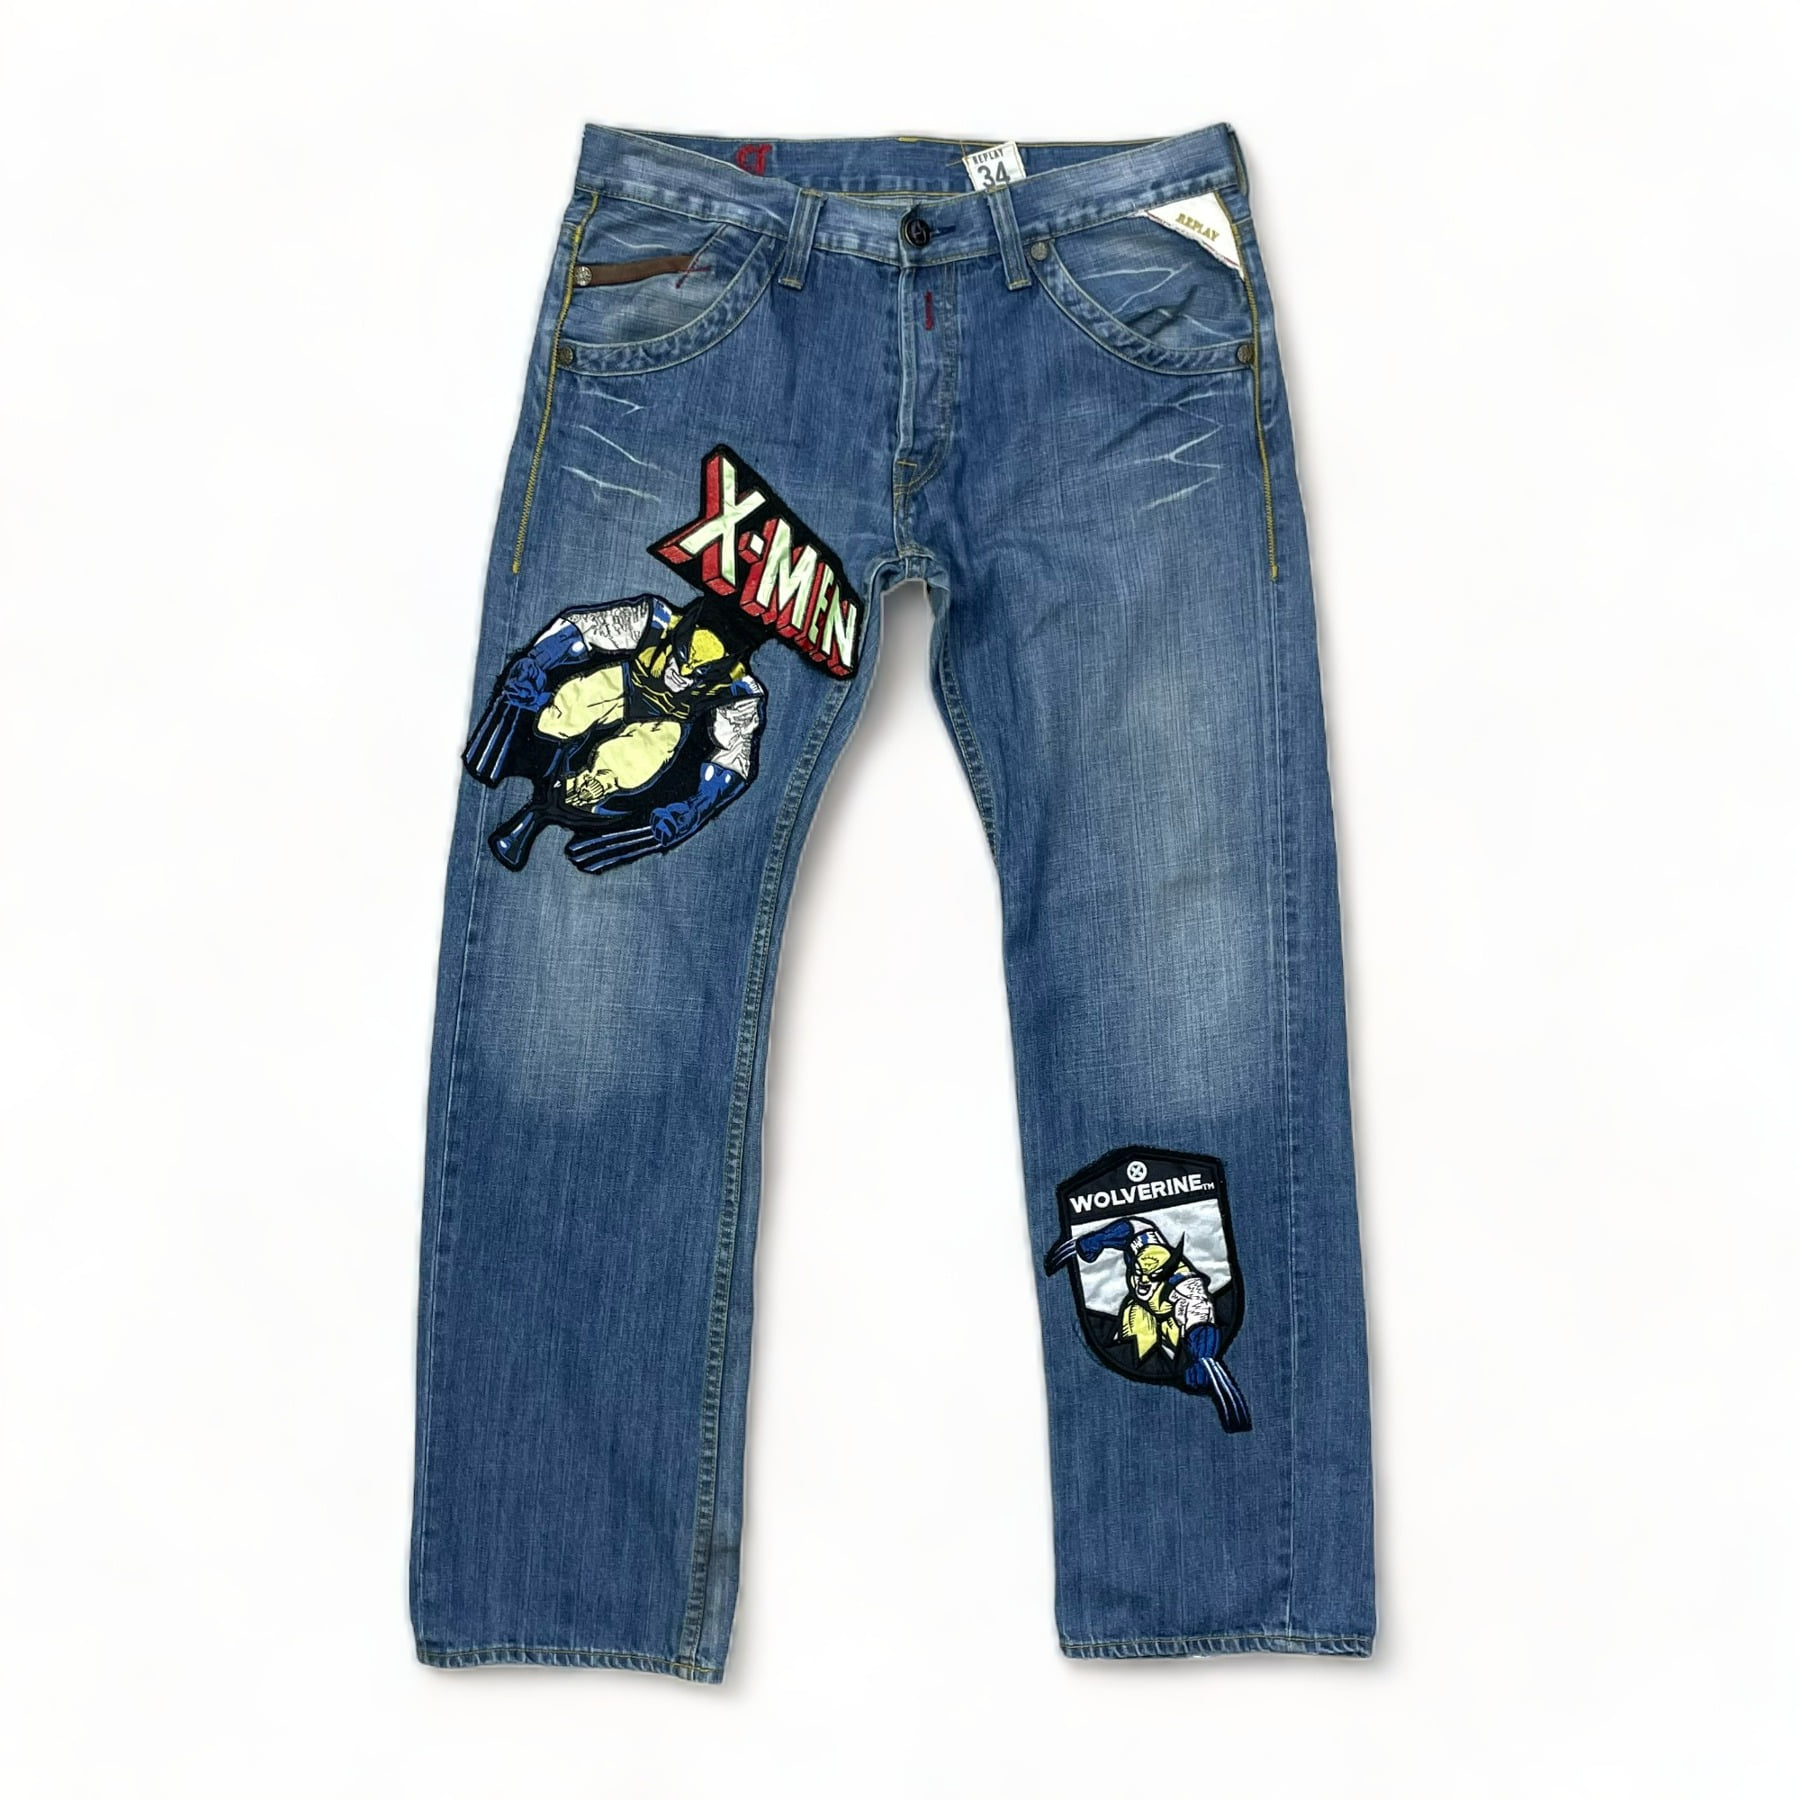 Replay X-Men Customized Jeans - 36inch